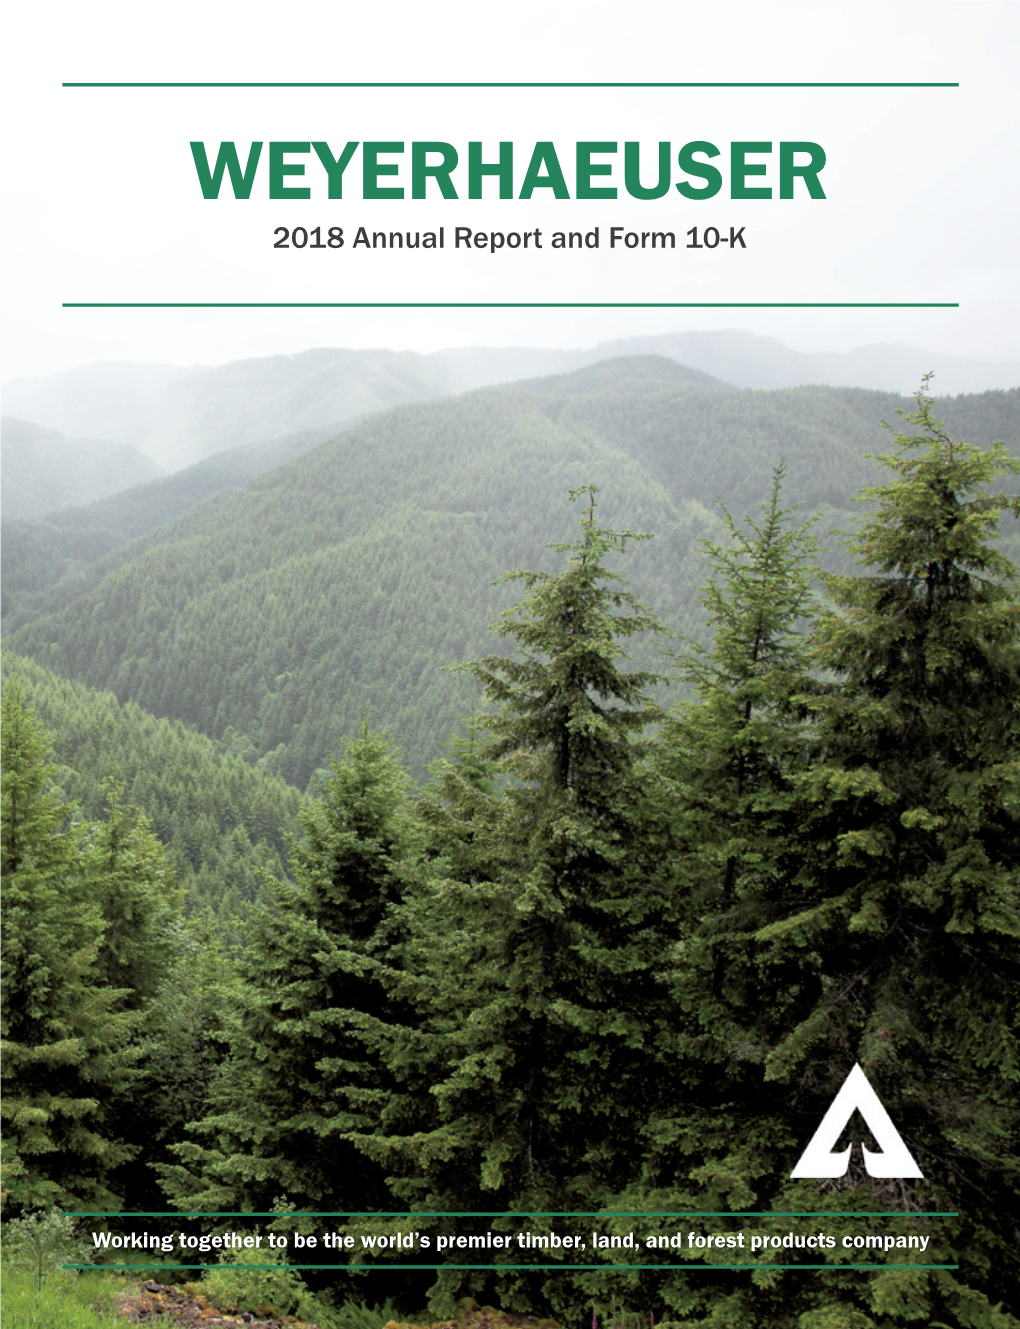 WEYERHAEUSER 2018 Annual Report and Form 10-K